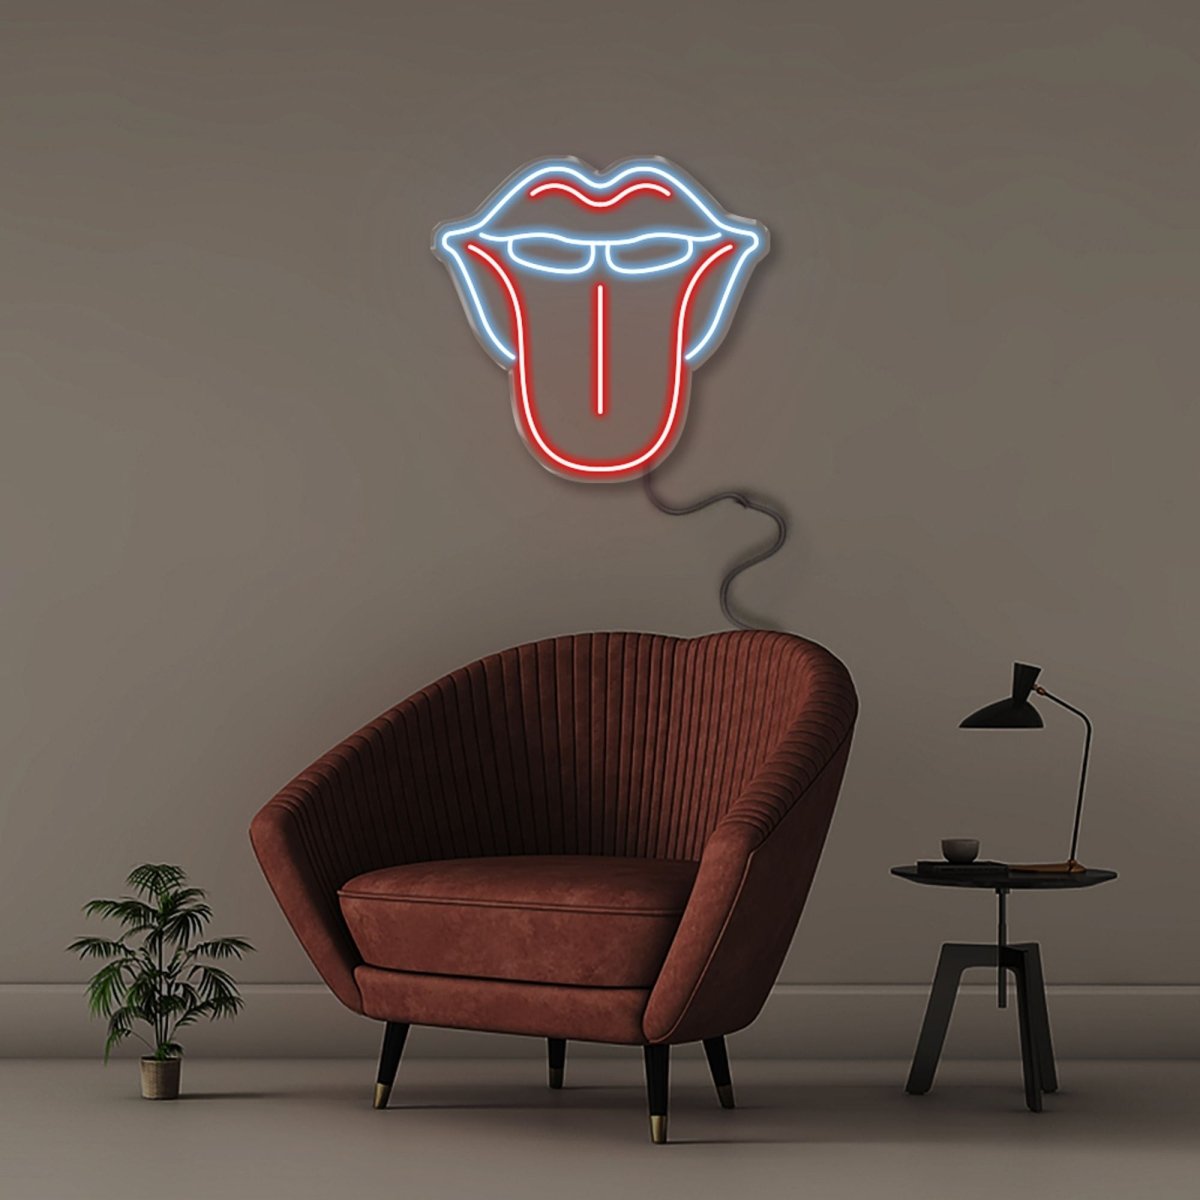 Mouth Light Sign - Neonific - LED Neon Signs - 61cm (24") -